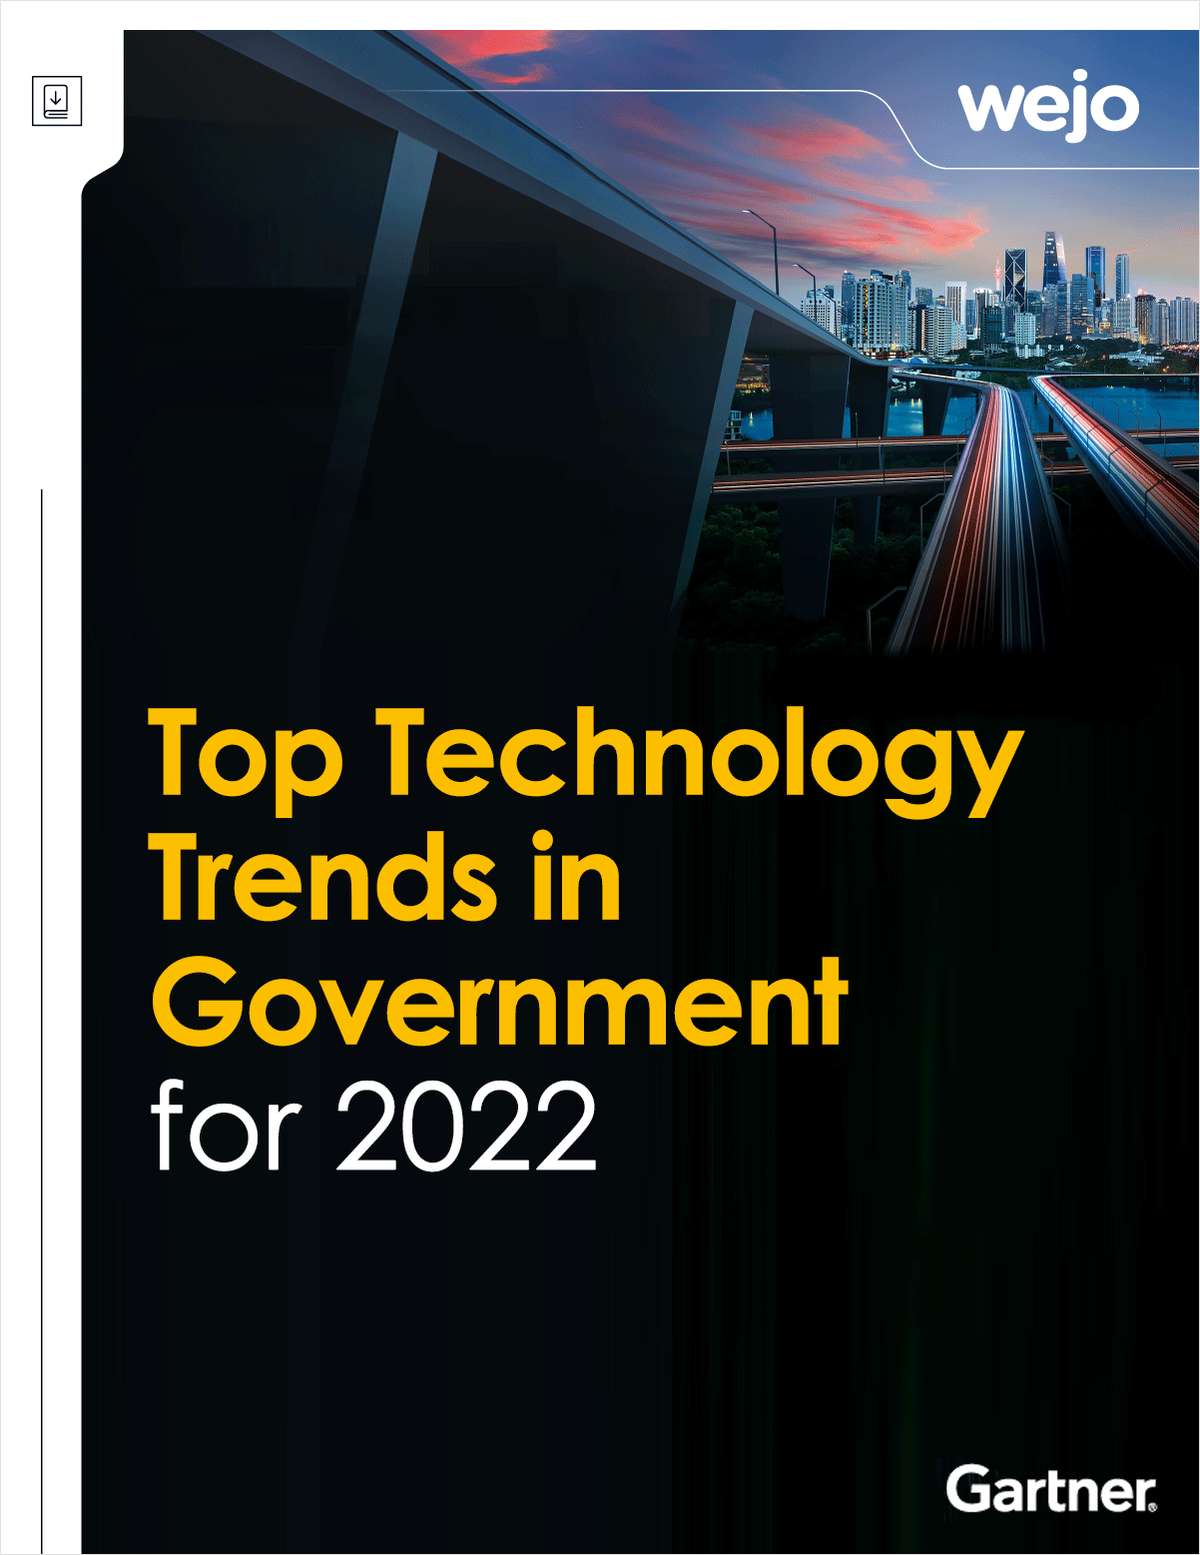 Top Technology Trends in Government for 2022